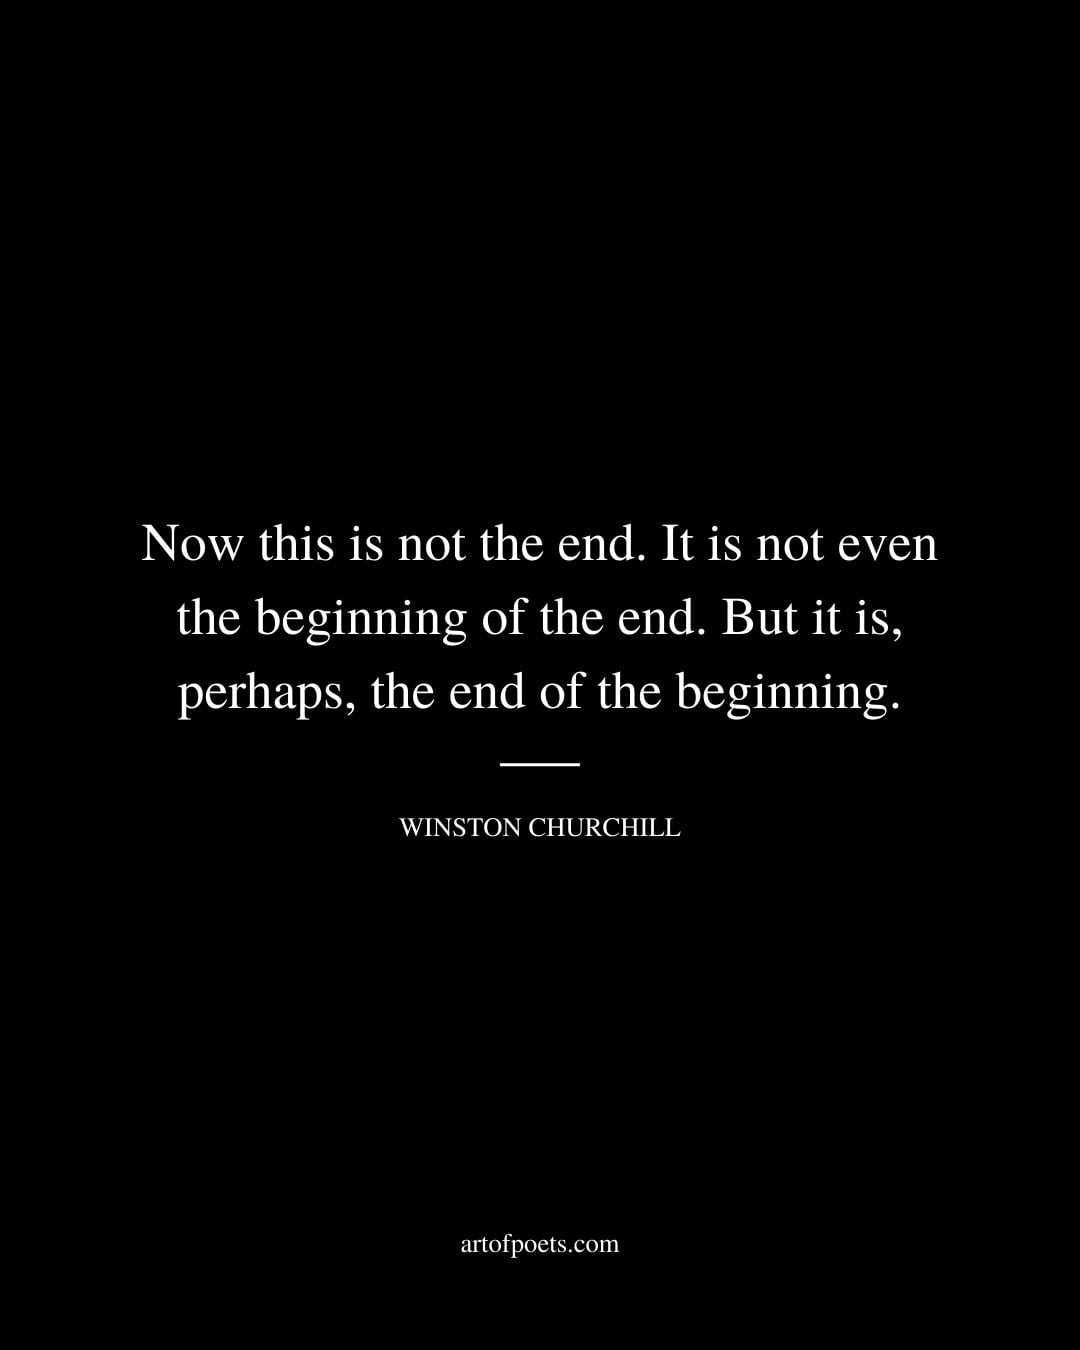 Now this is not the end. It is not even the beginning of the end. But it is perhaps the end of the beginning